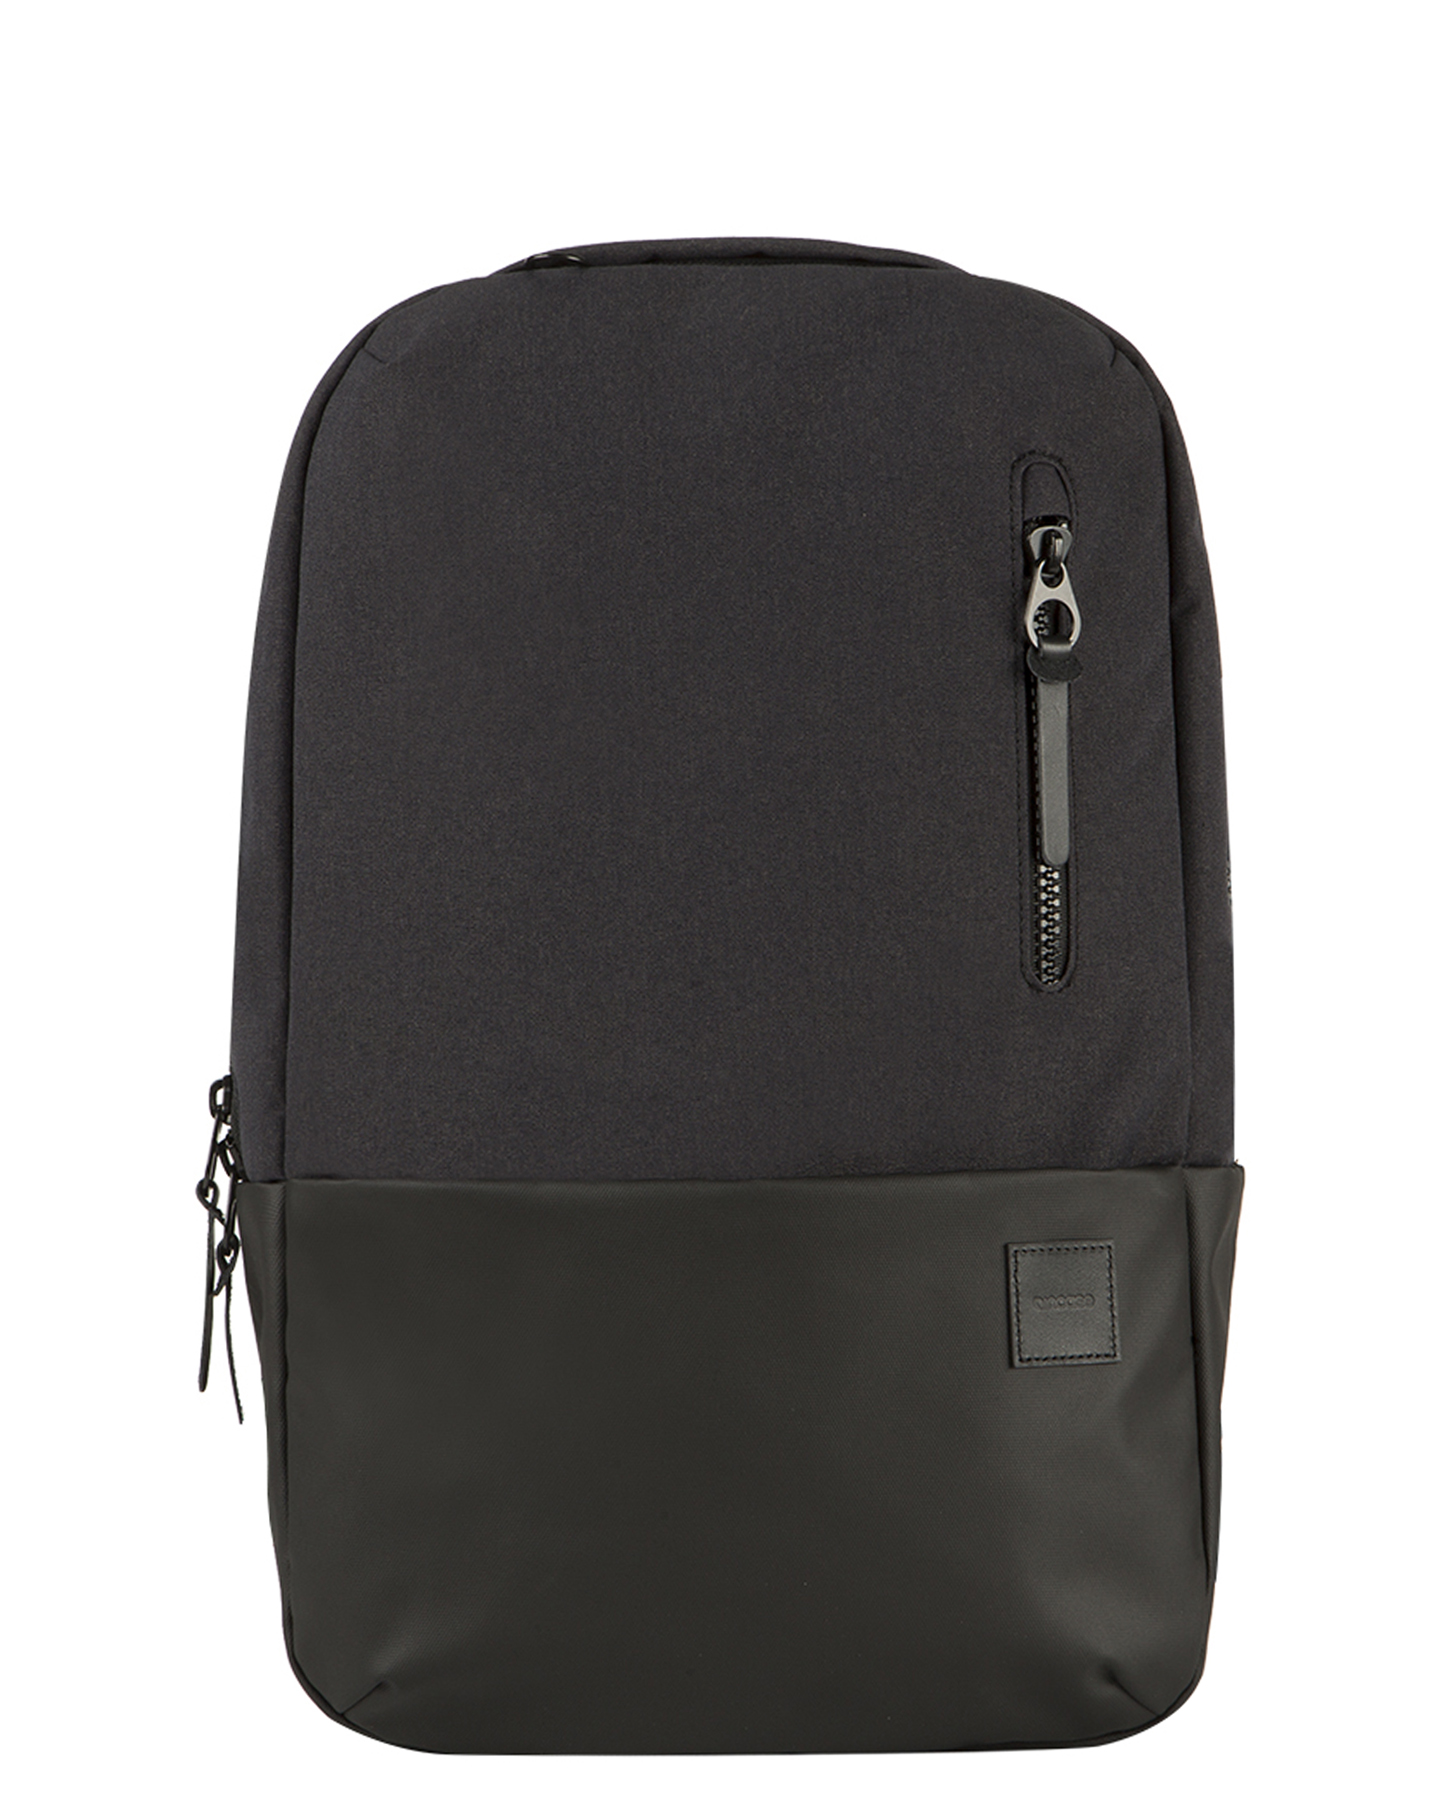 Incase Compass 24L Backpack - Black Camo | SurfStitch